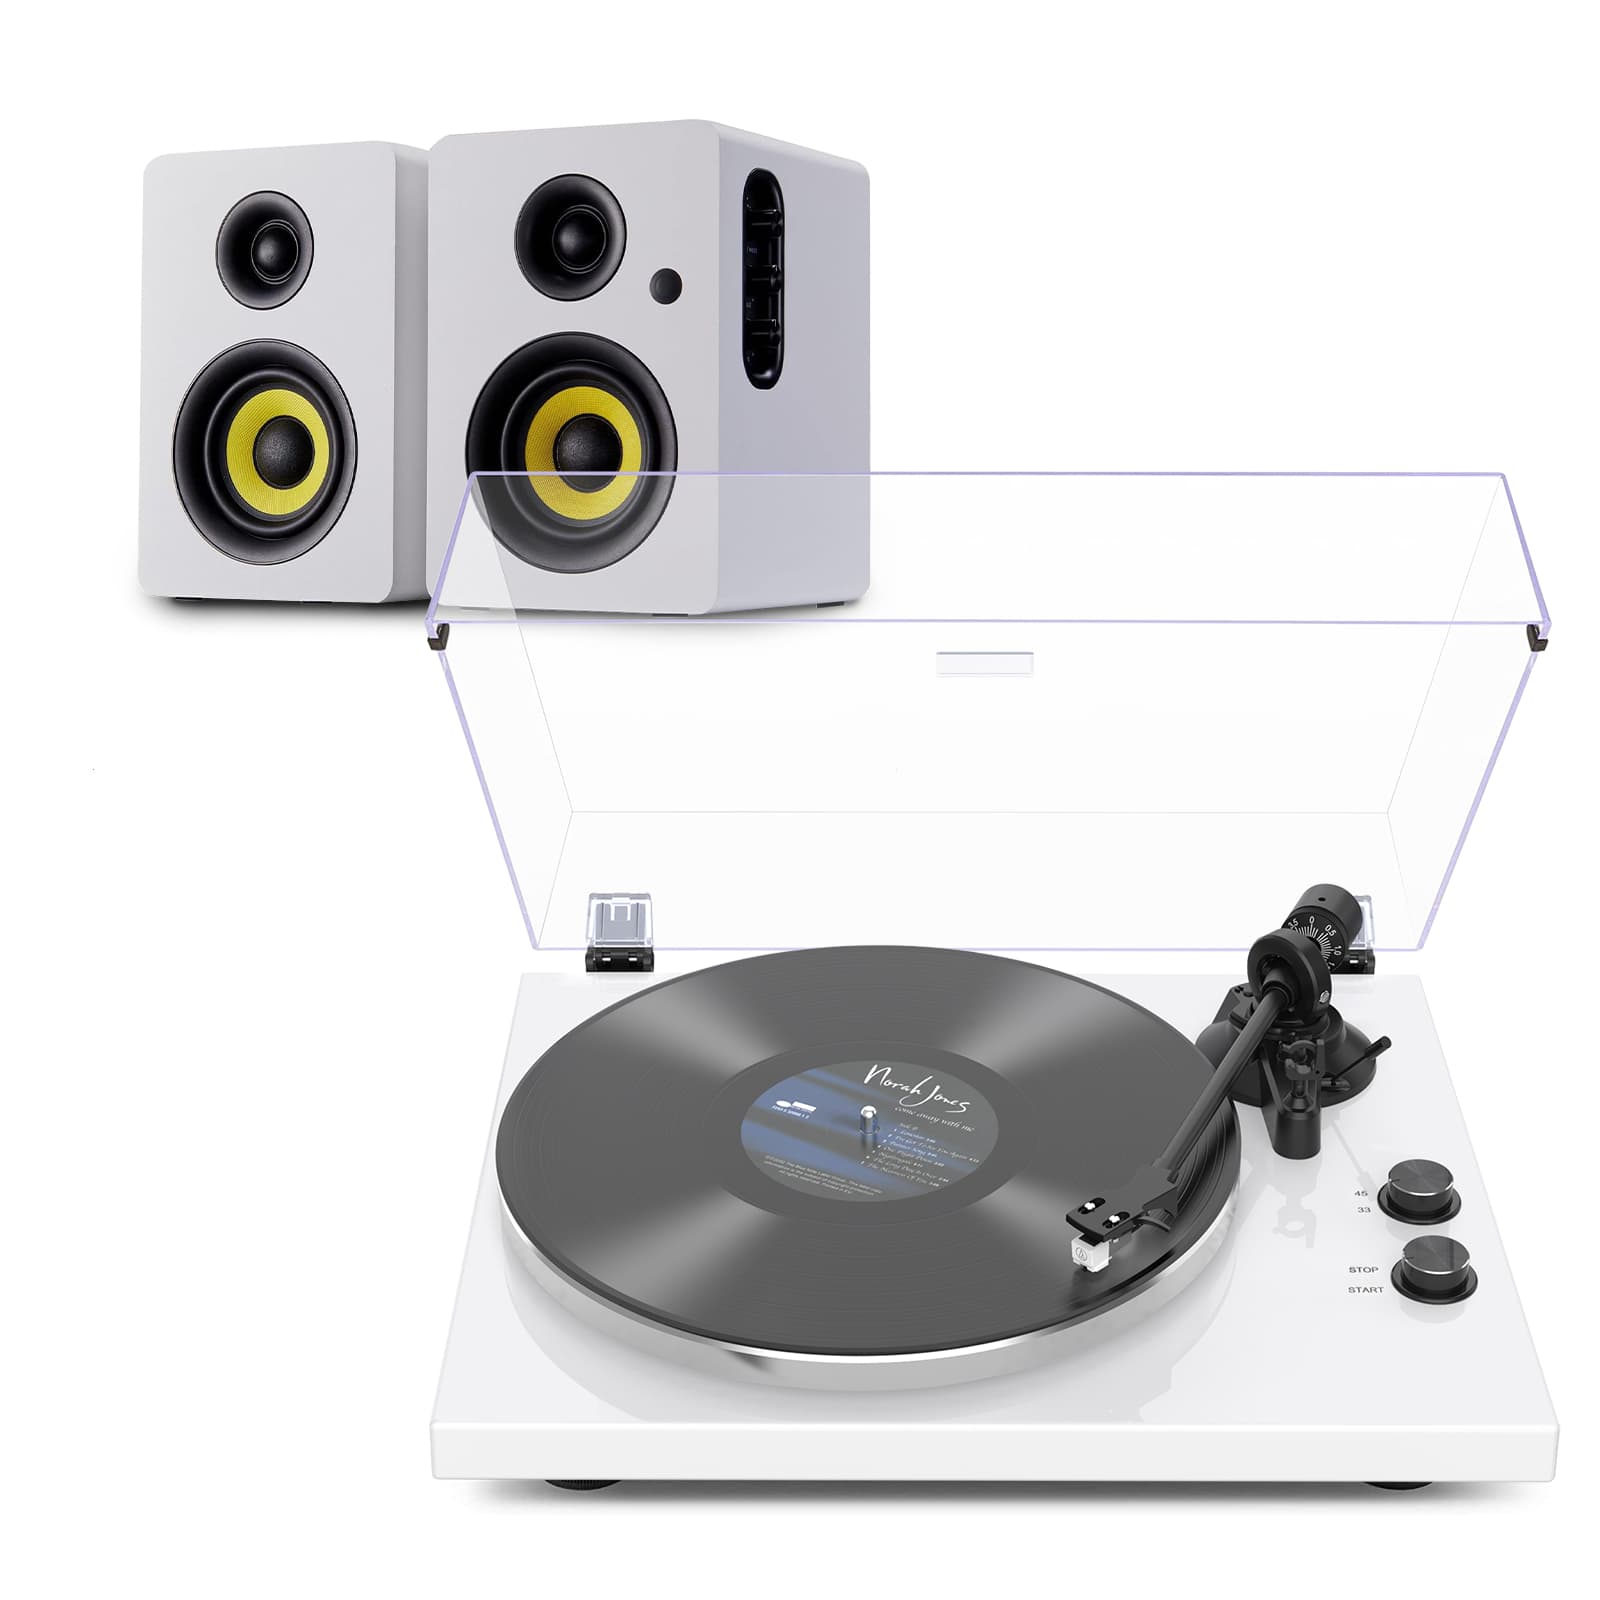 HQKZ-006 High Fidelity Turntable with Sanyun Bluetooth 80W Dual-mode Active Speakers